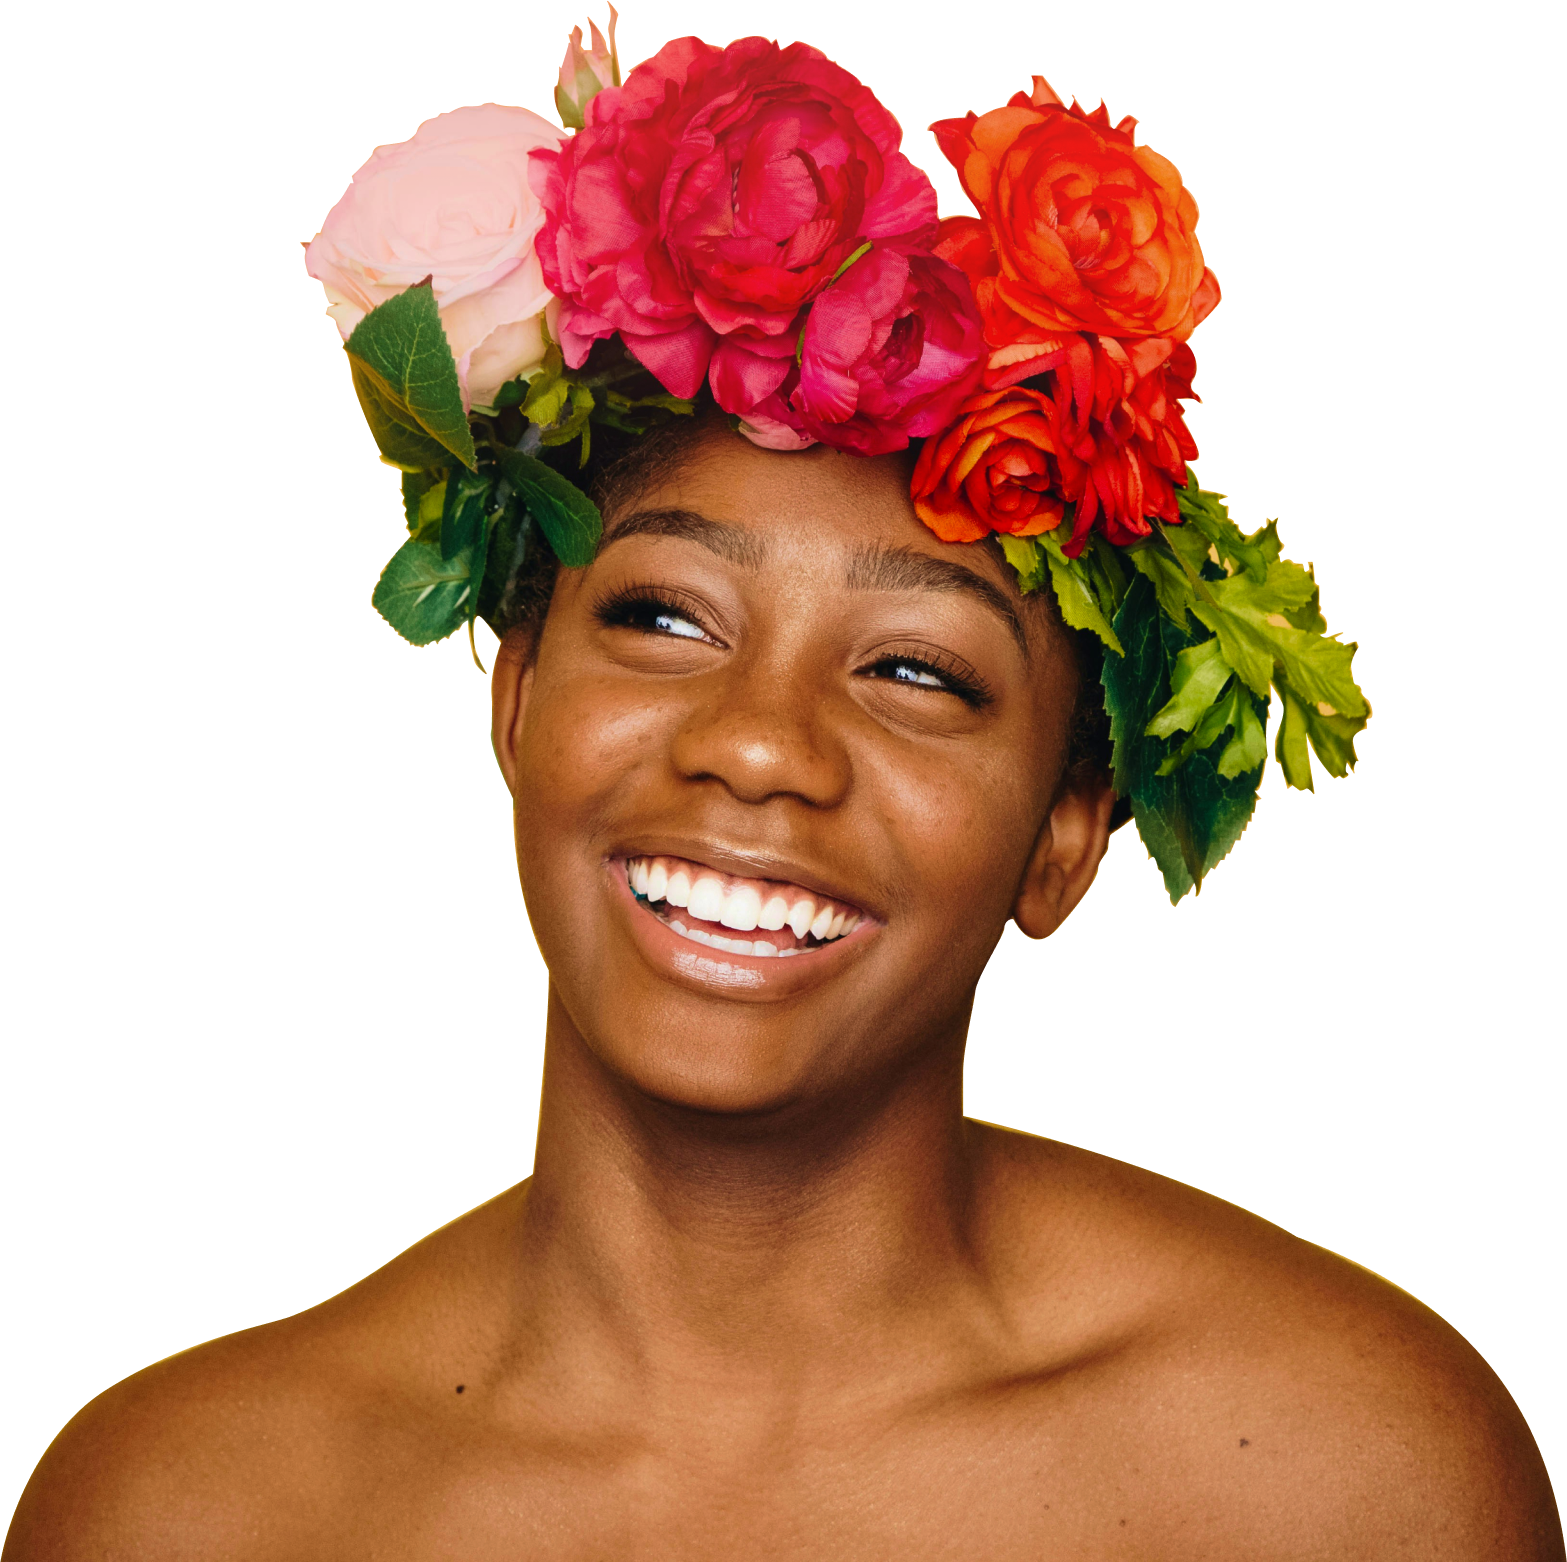 A woman smiling with flowers in her hair